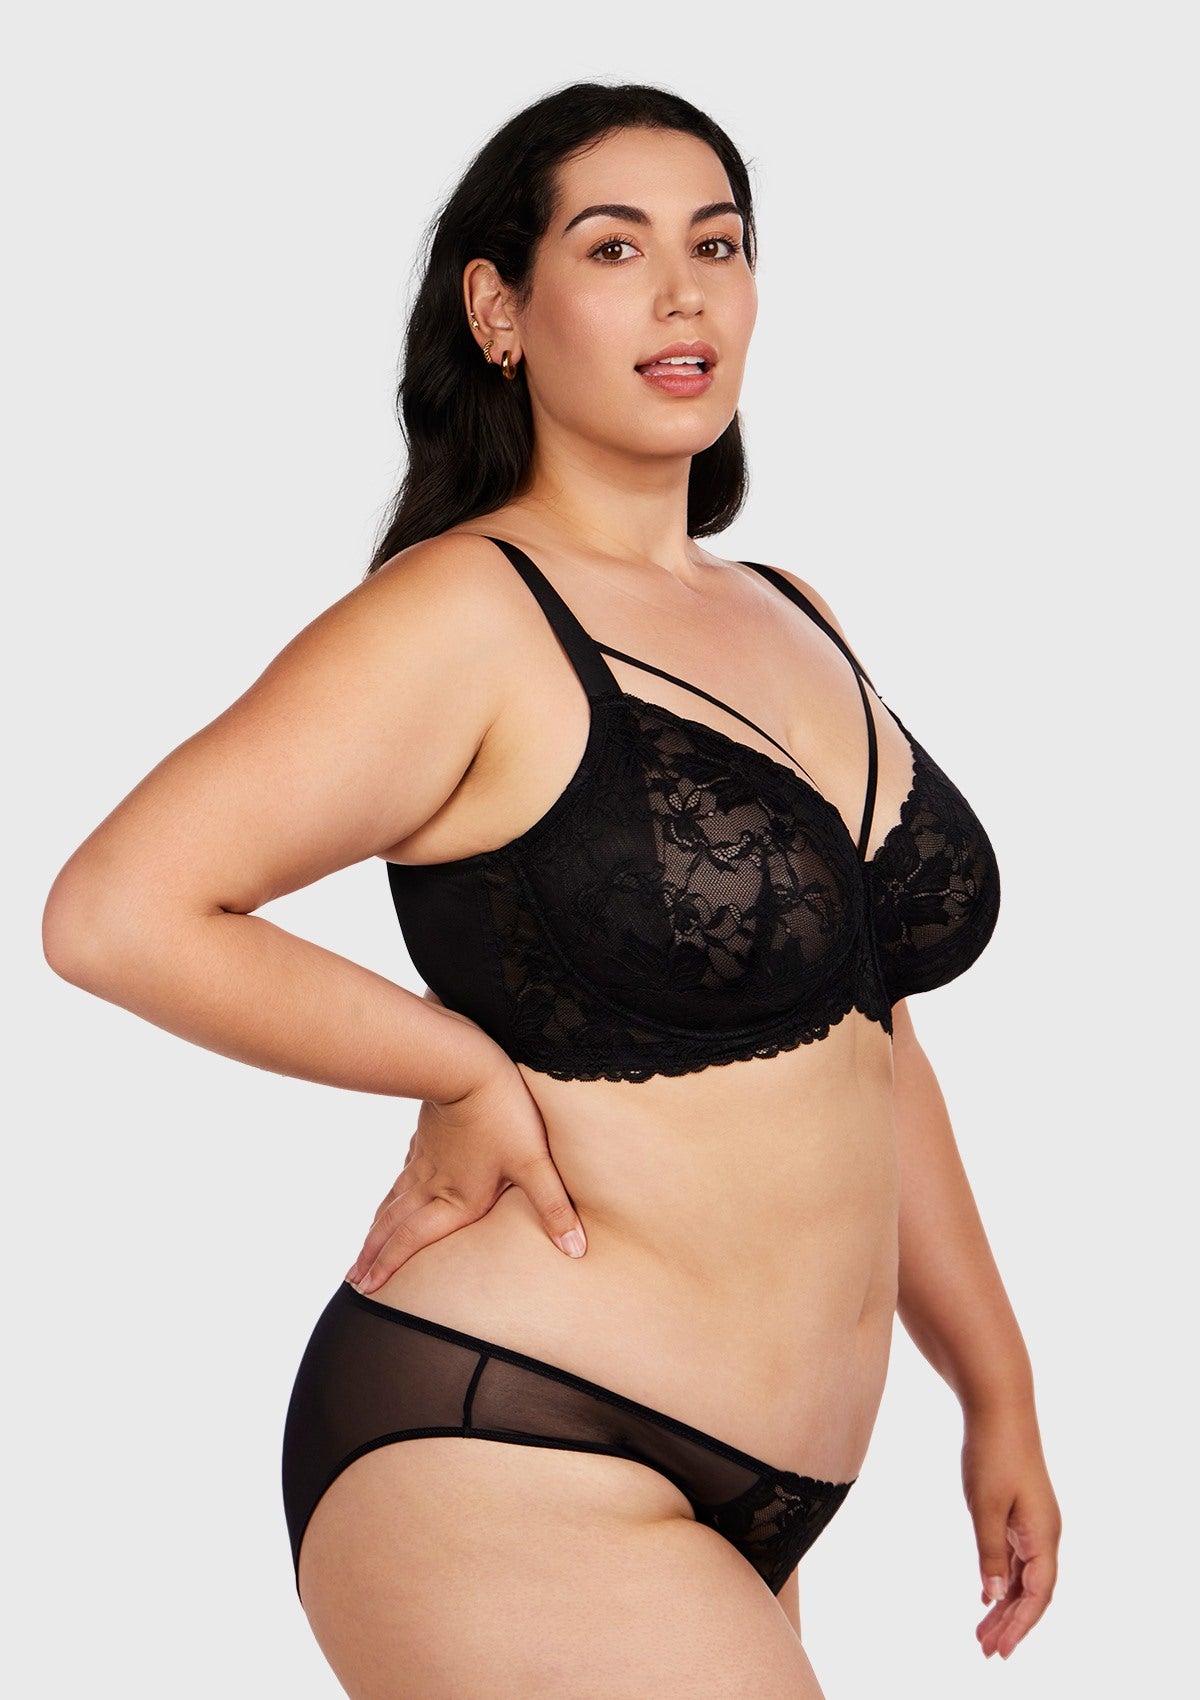 HSIA Pretty In Petals Bra - Plus Size Lingerie For Comfrot And Support - Black / 44 / D